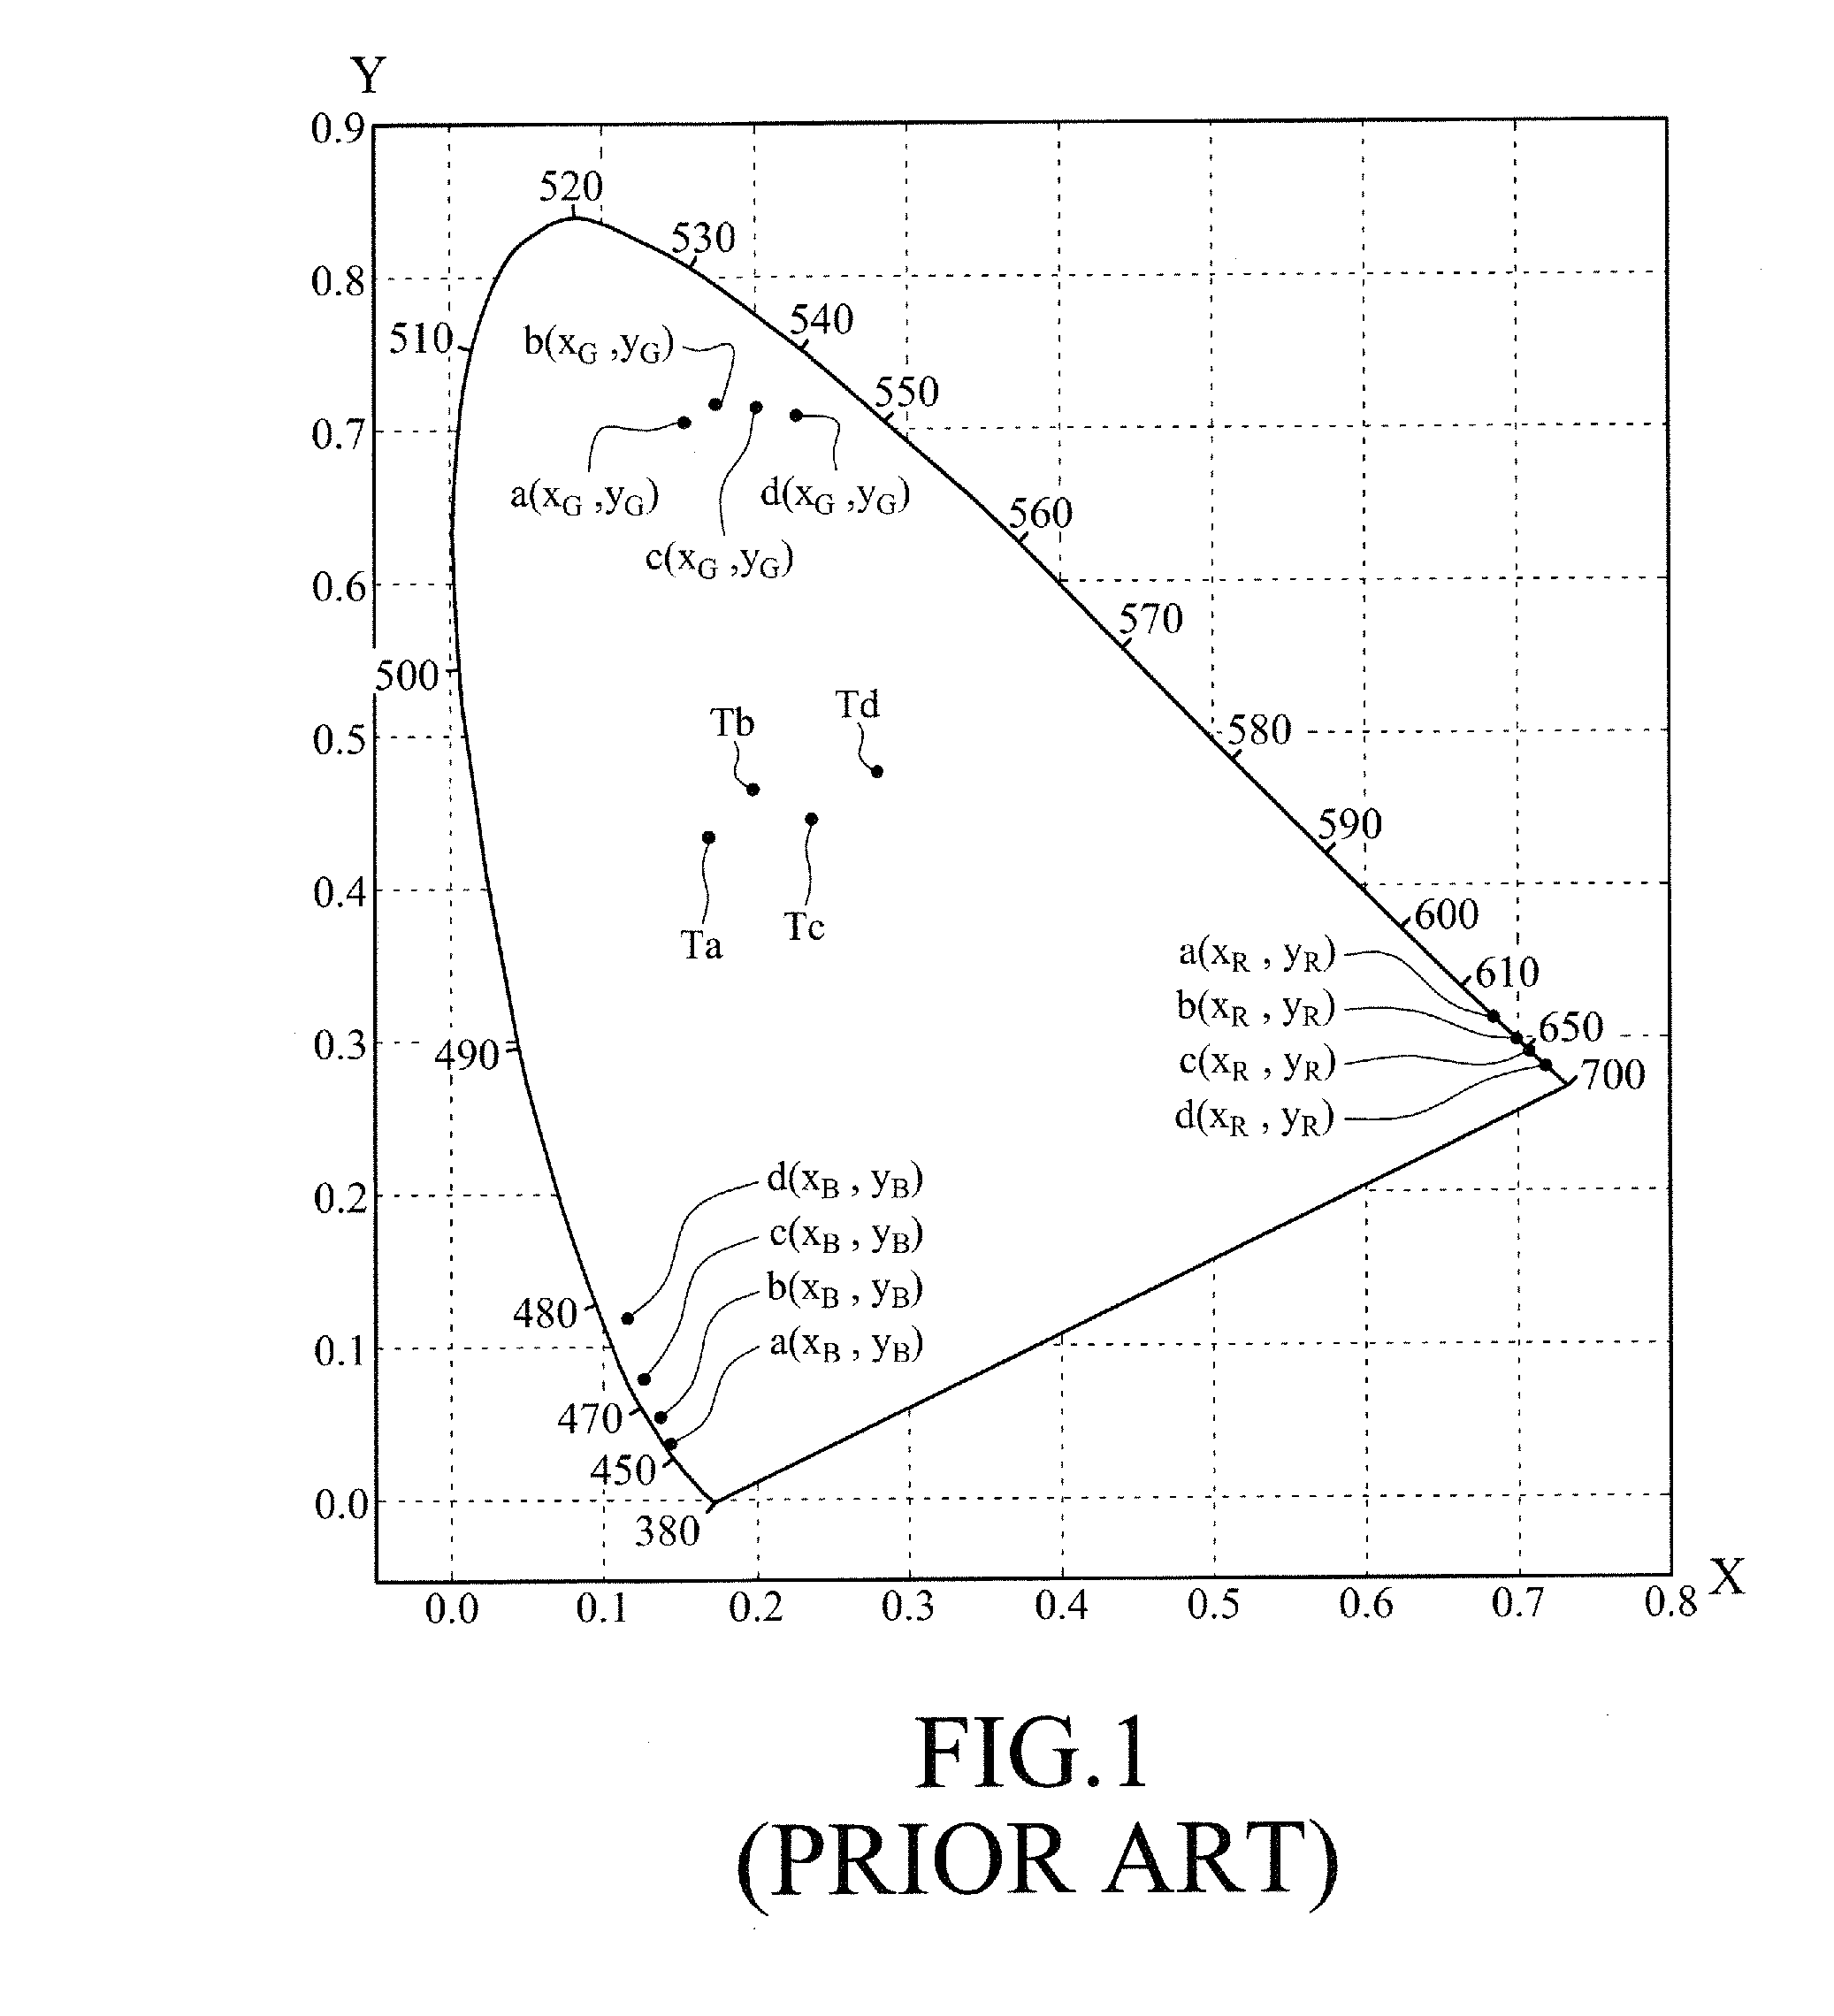 Management system for unifying LED light color and method thereof